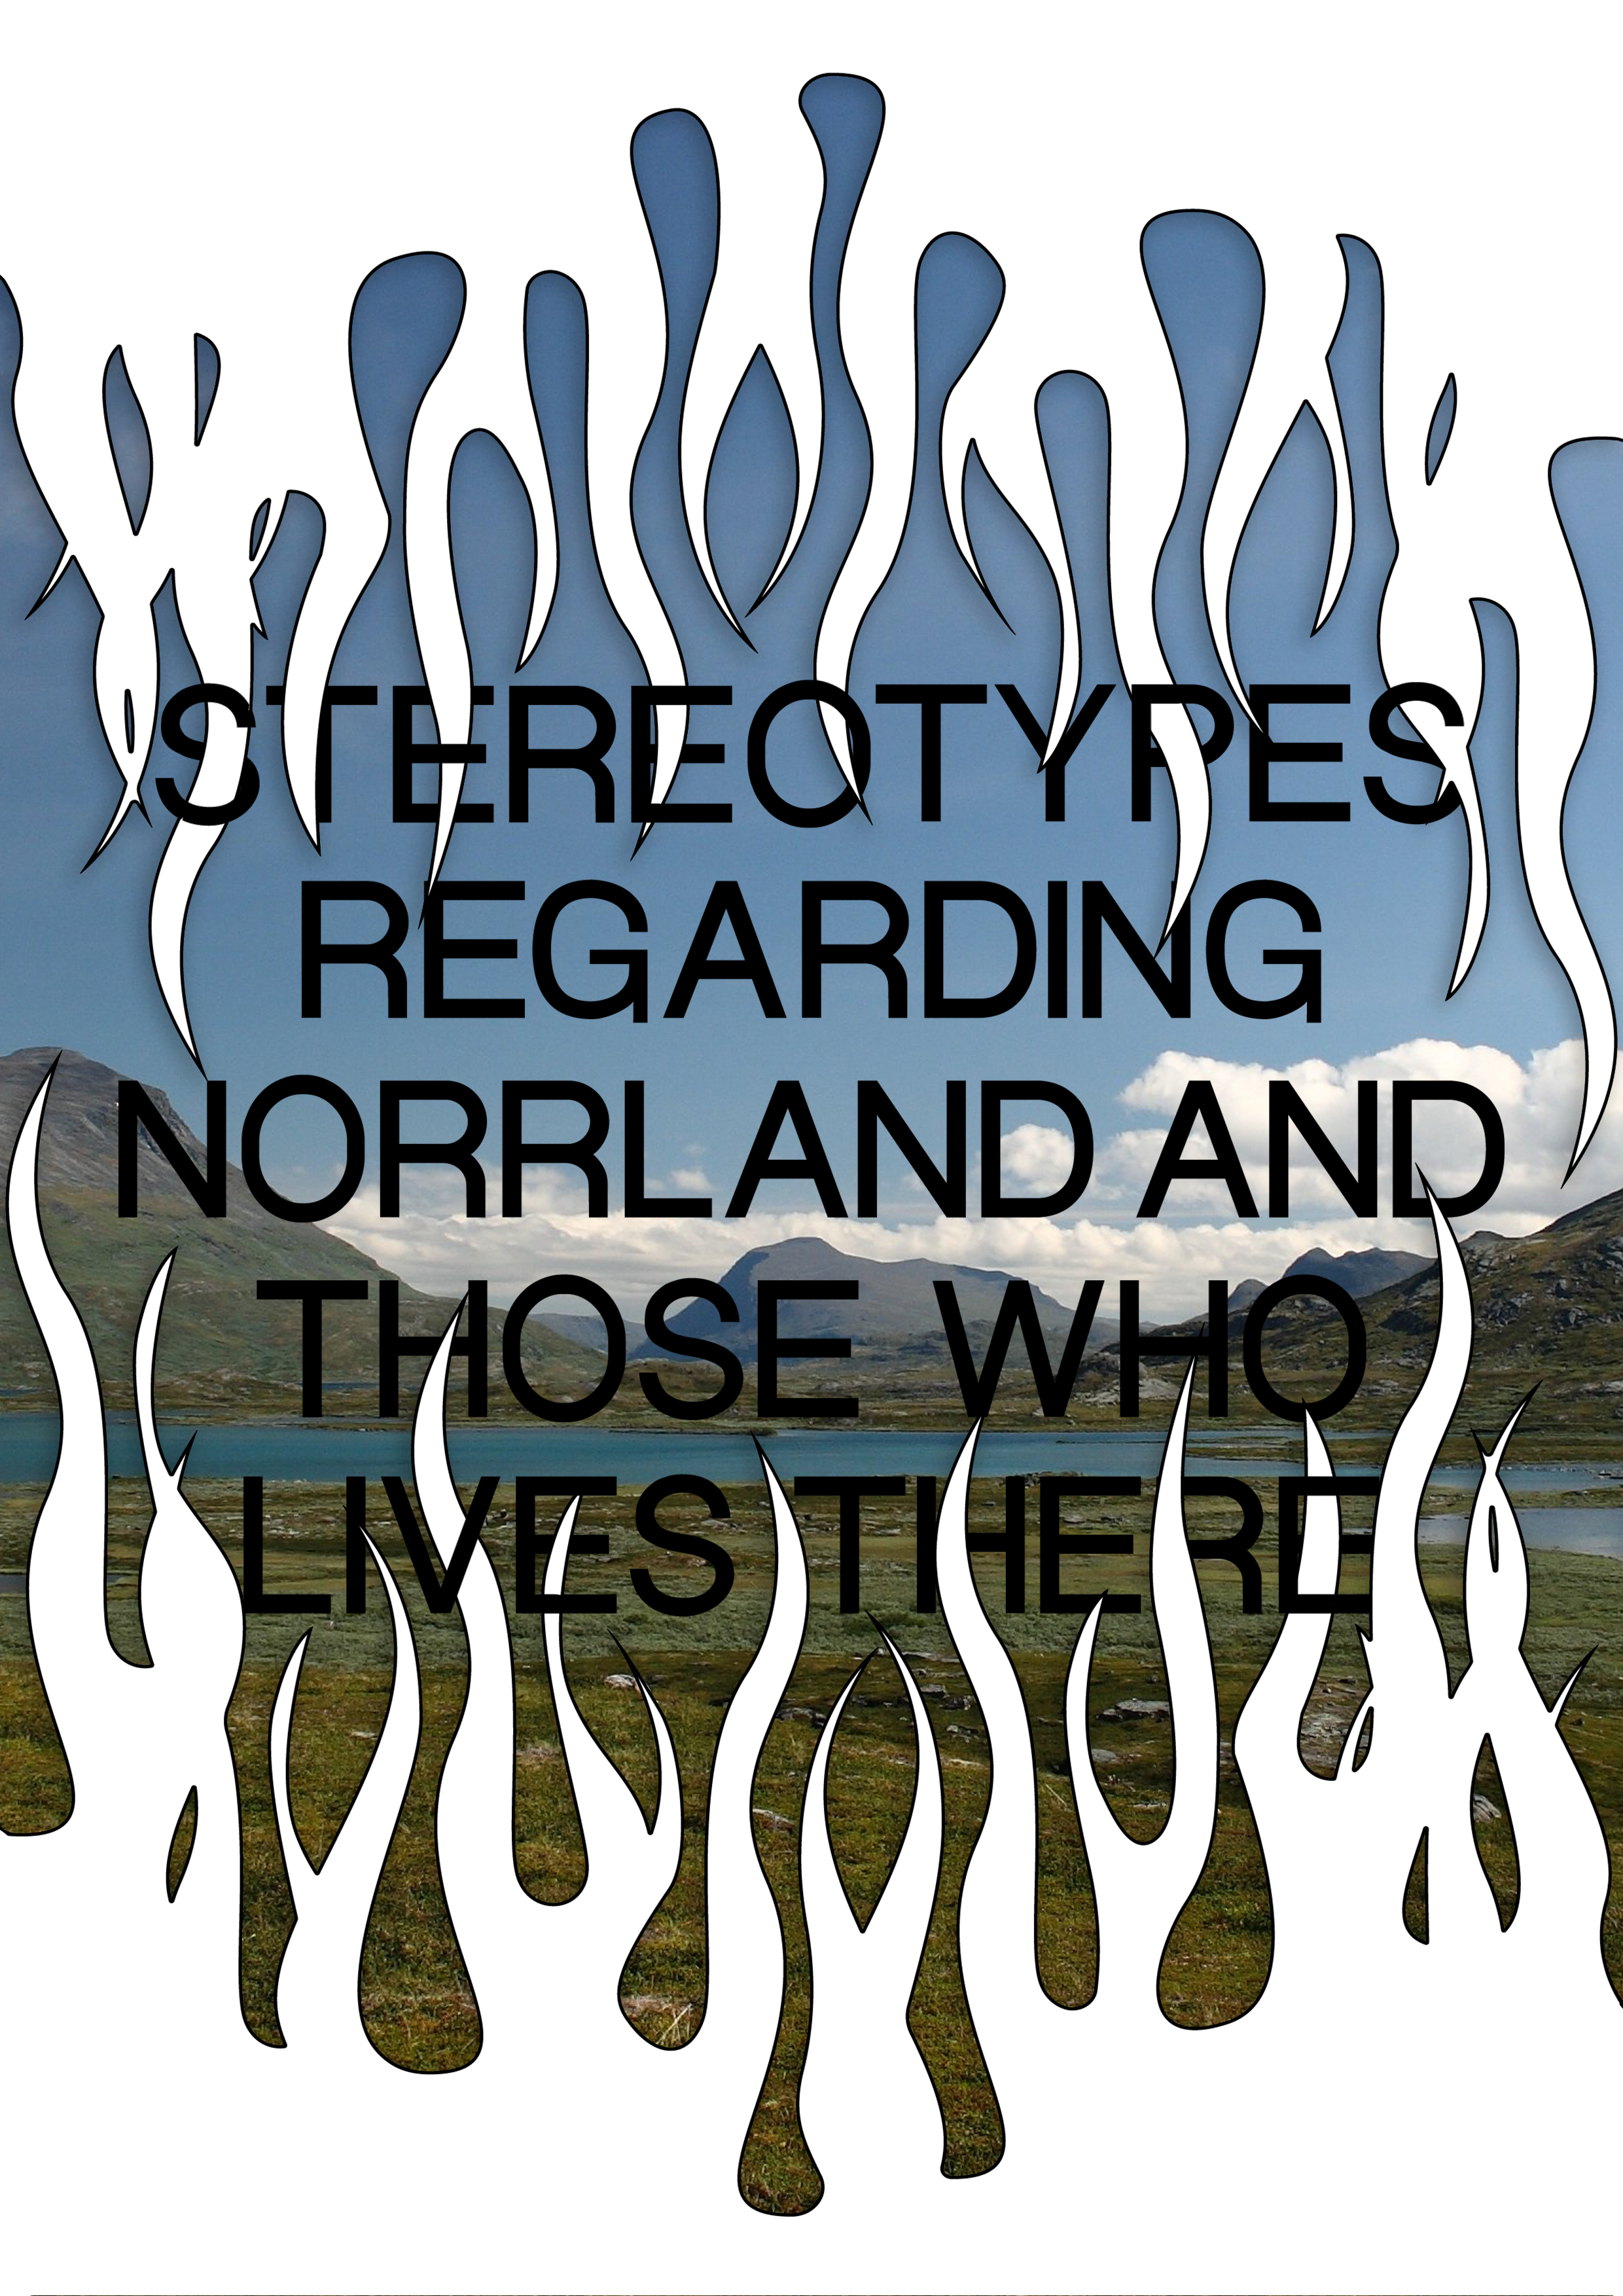 Sterotypes Regarding Norrland and Those Who Lives There